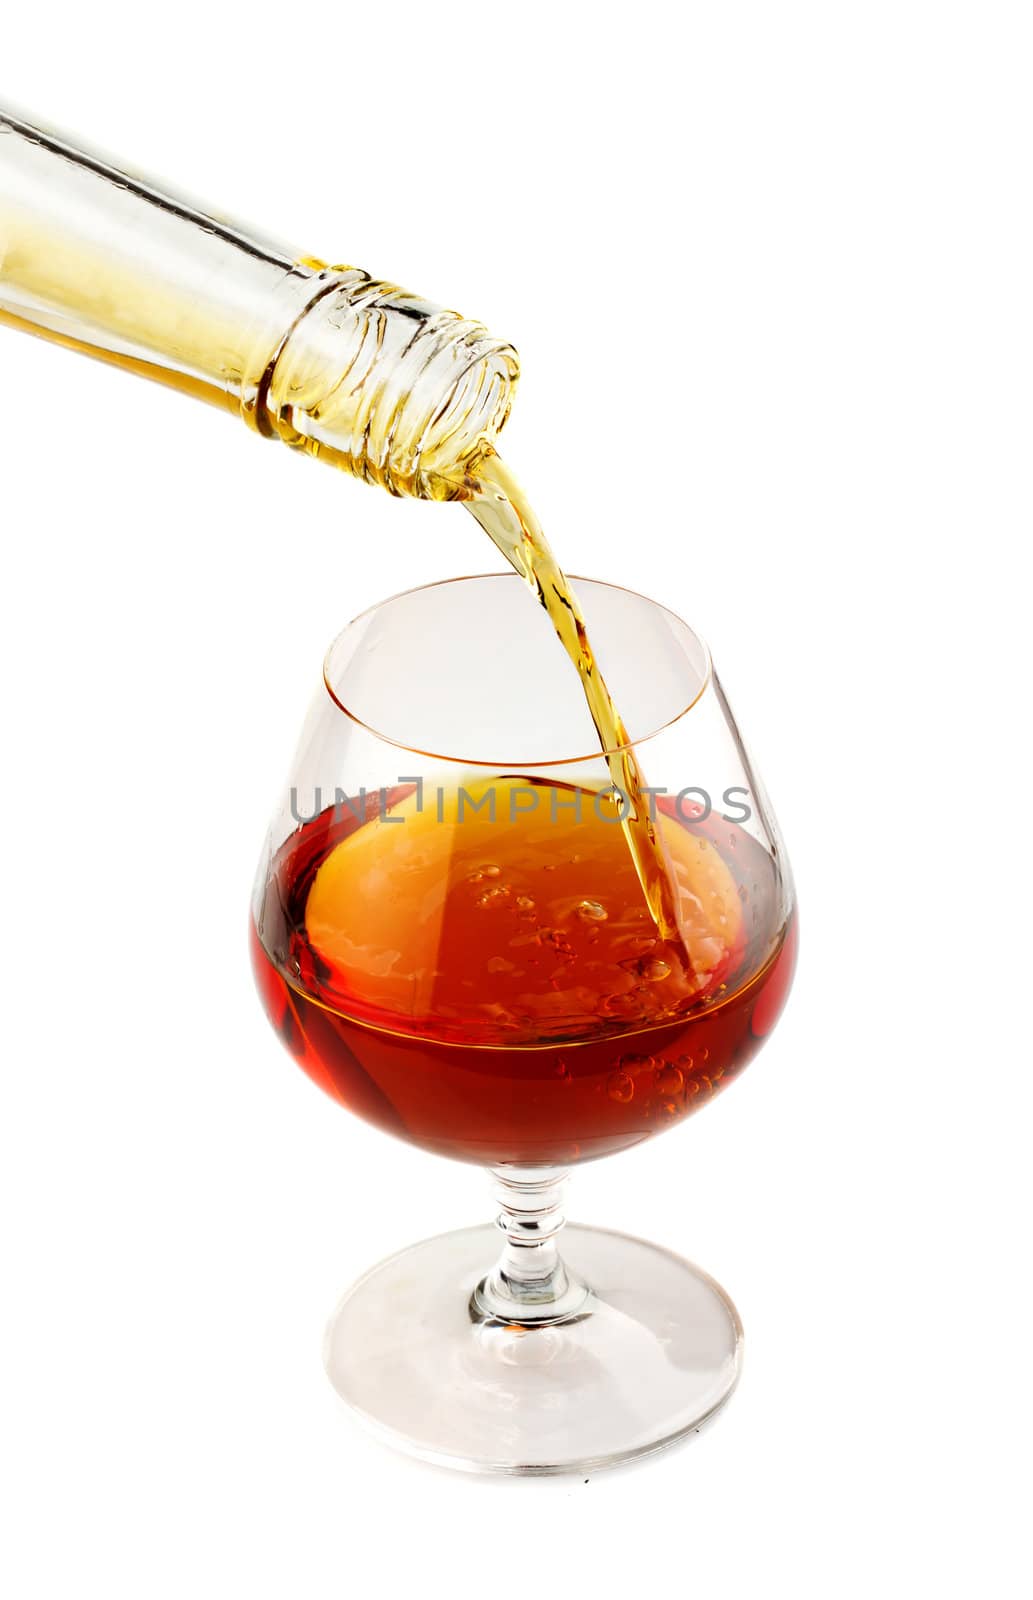 Filling a glass of brandy isolated on white background